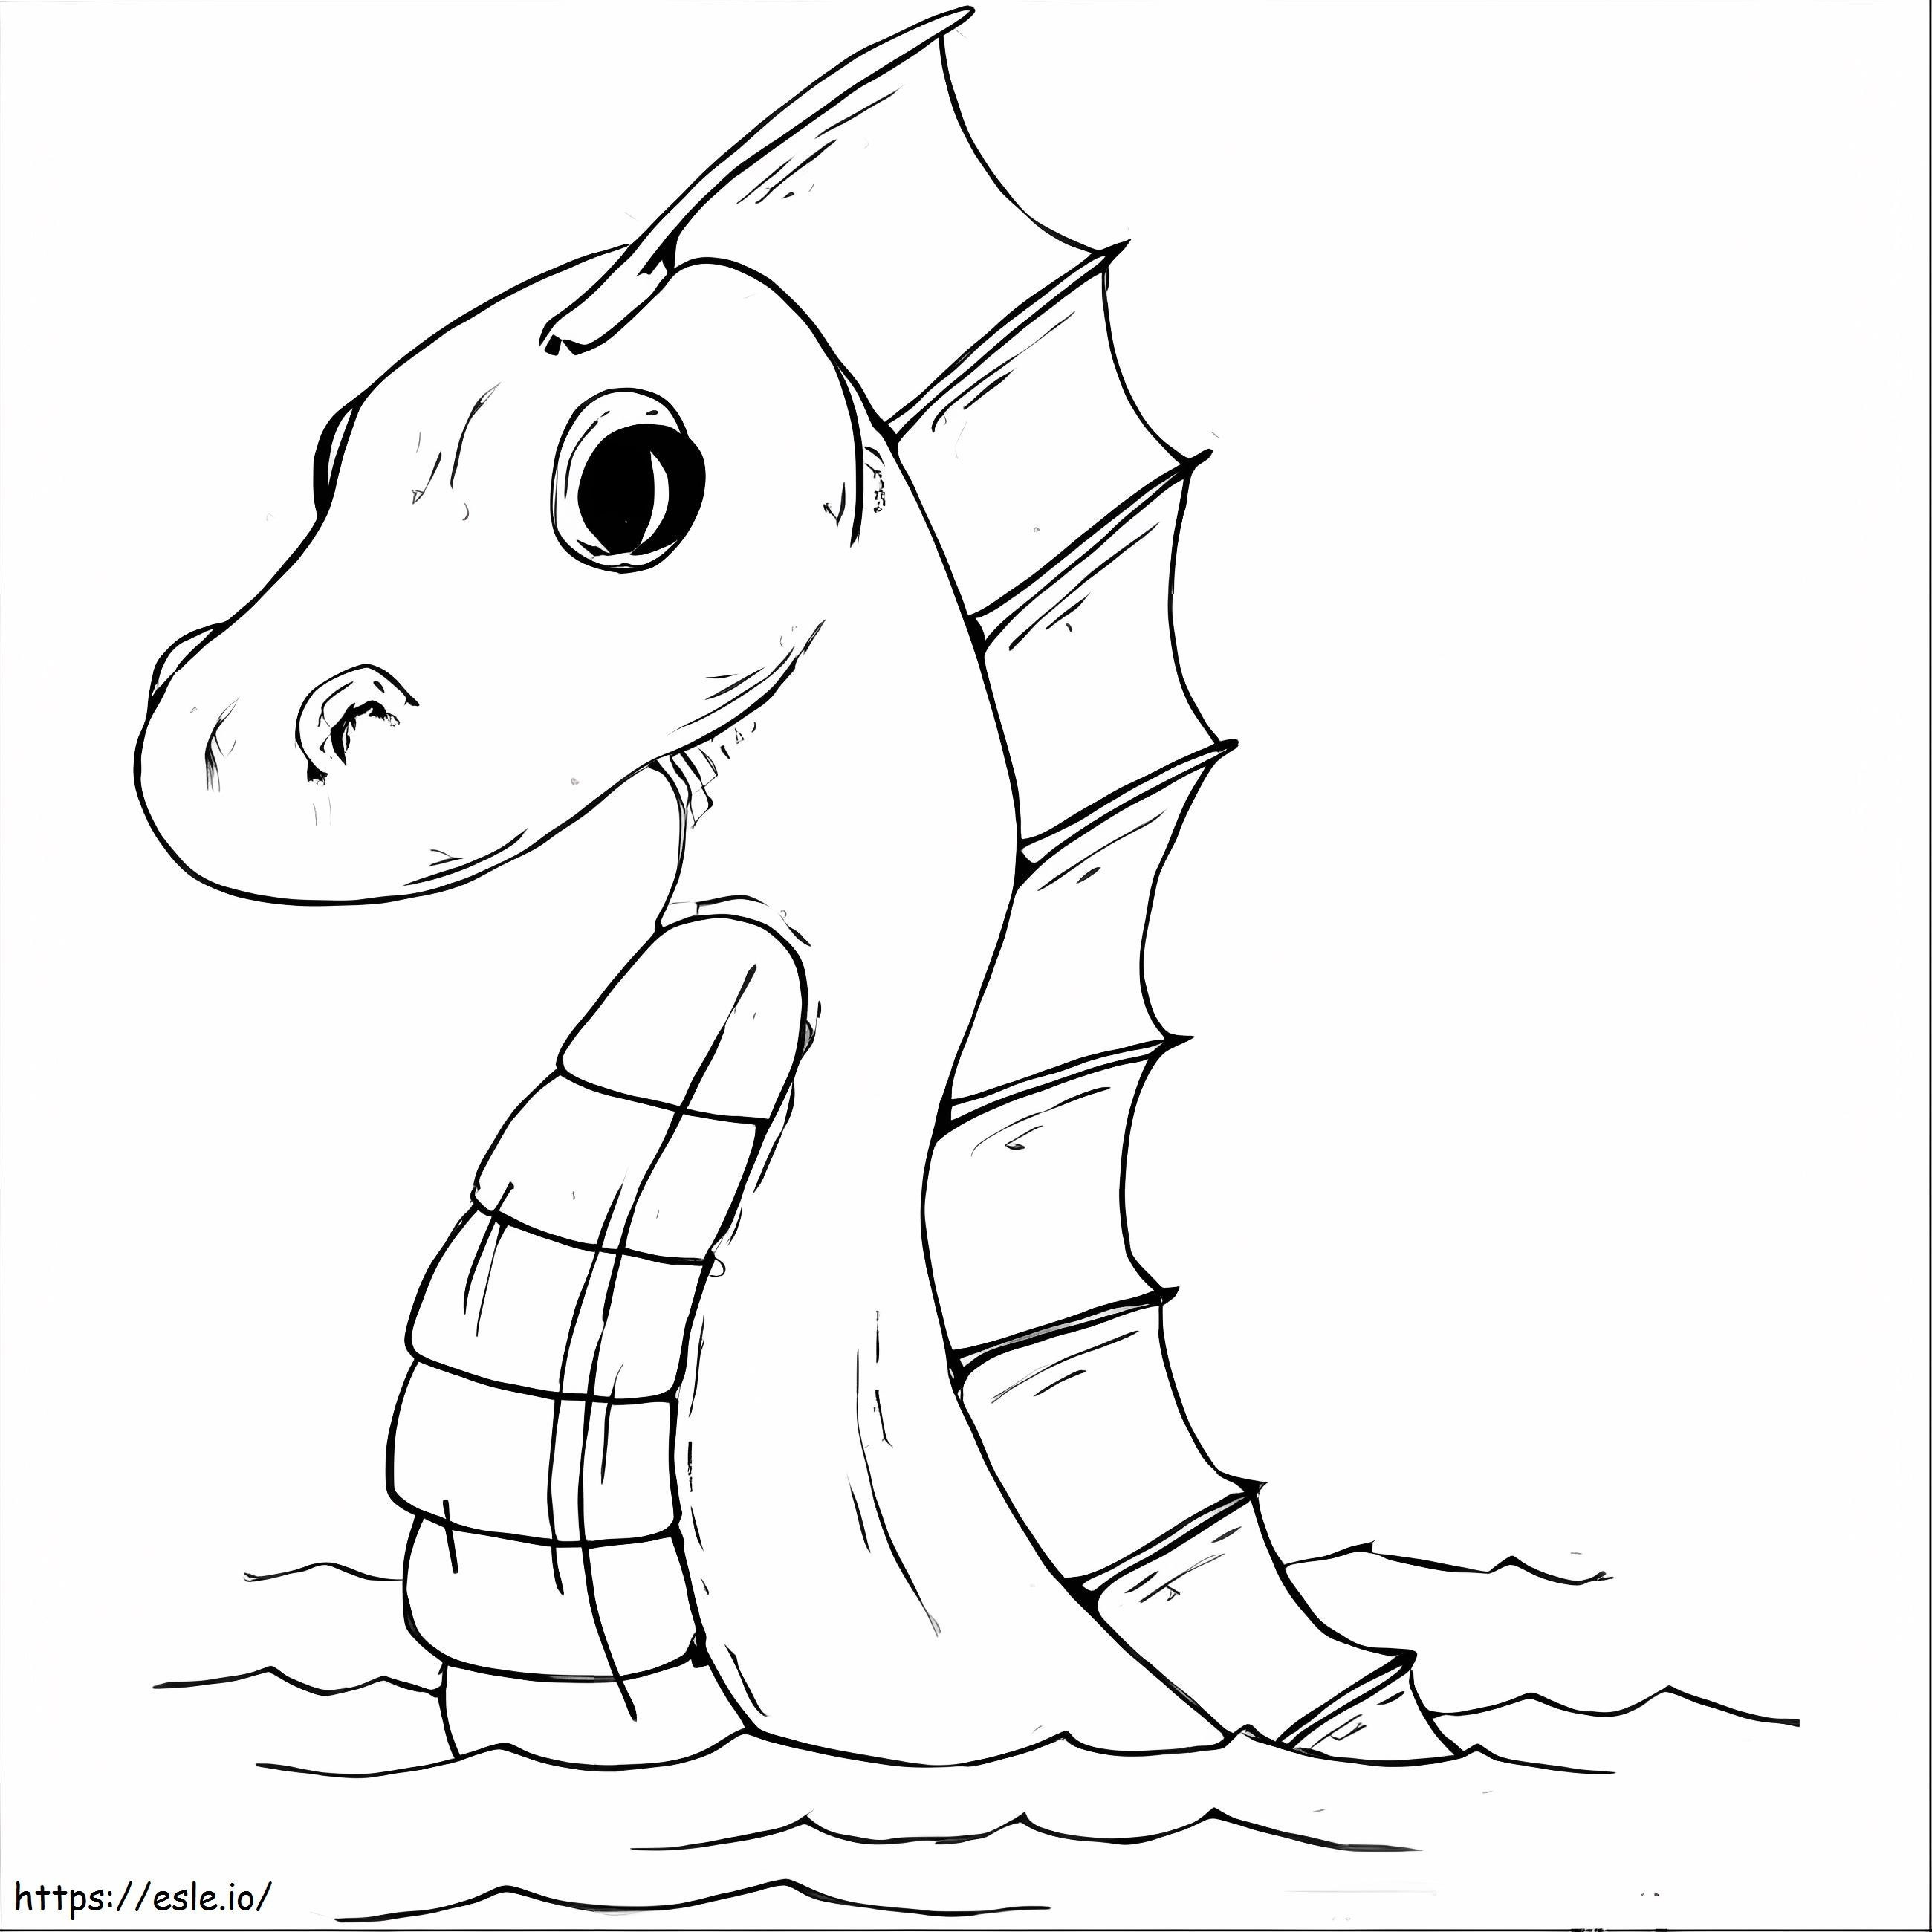 Sea Snake'S Head coloring page